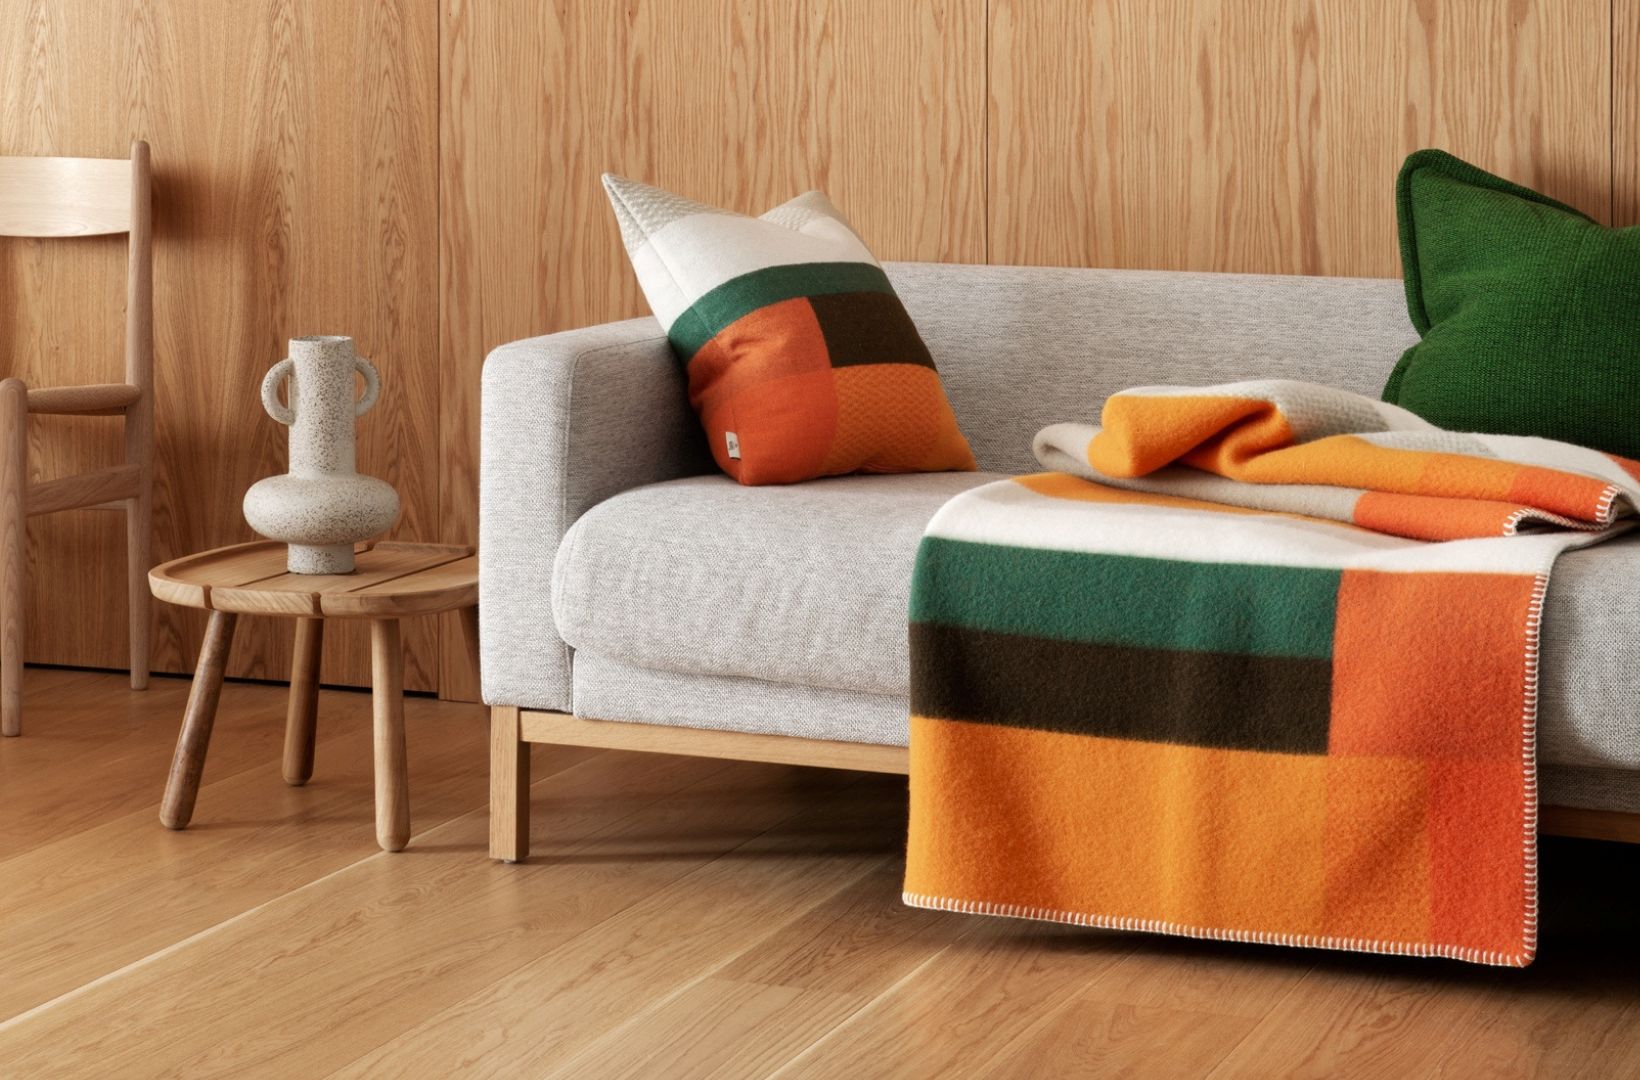 Røros Tweed produces a range of blankets, throws and cushions. Photo: Røros Tweed.